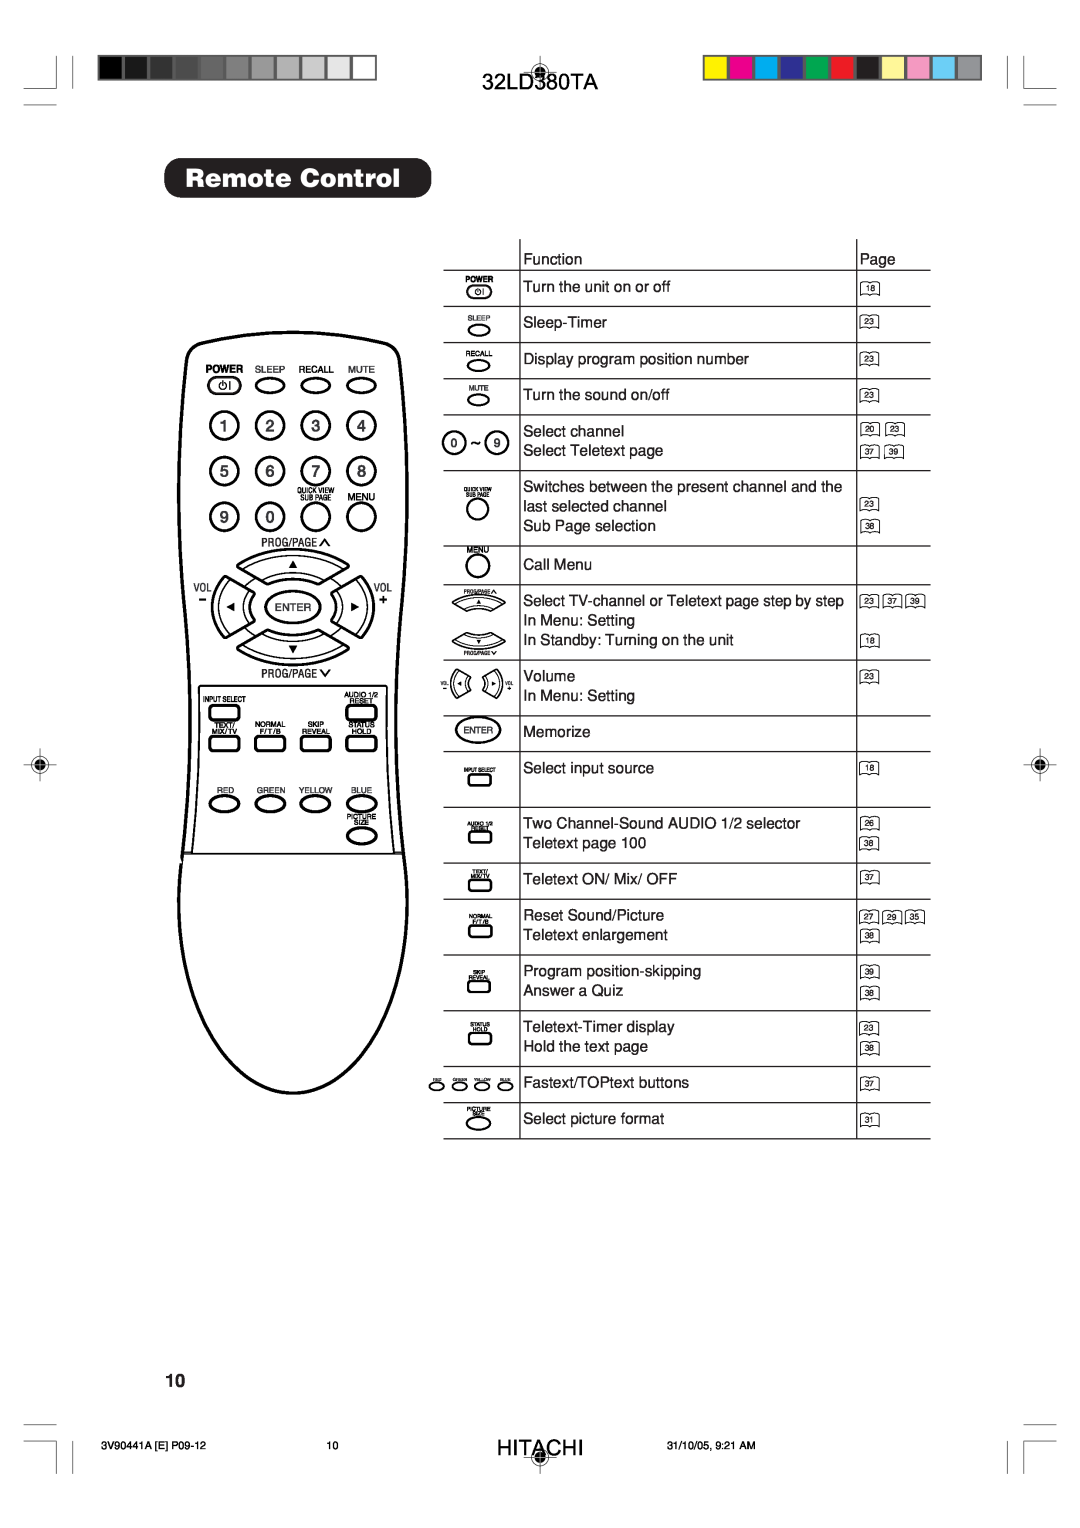 Hitachi 32LD380TA Remote Control, Hitachi, Function, Page, Turn the unit on or off, Sleep-Timer, Turn the sound on/off 